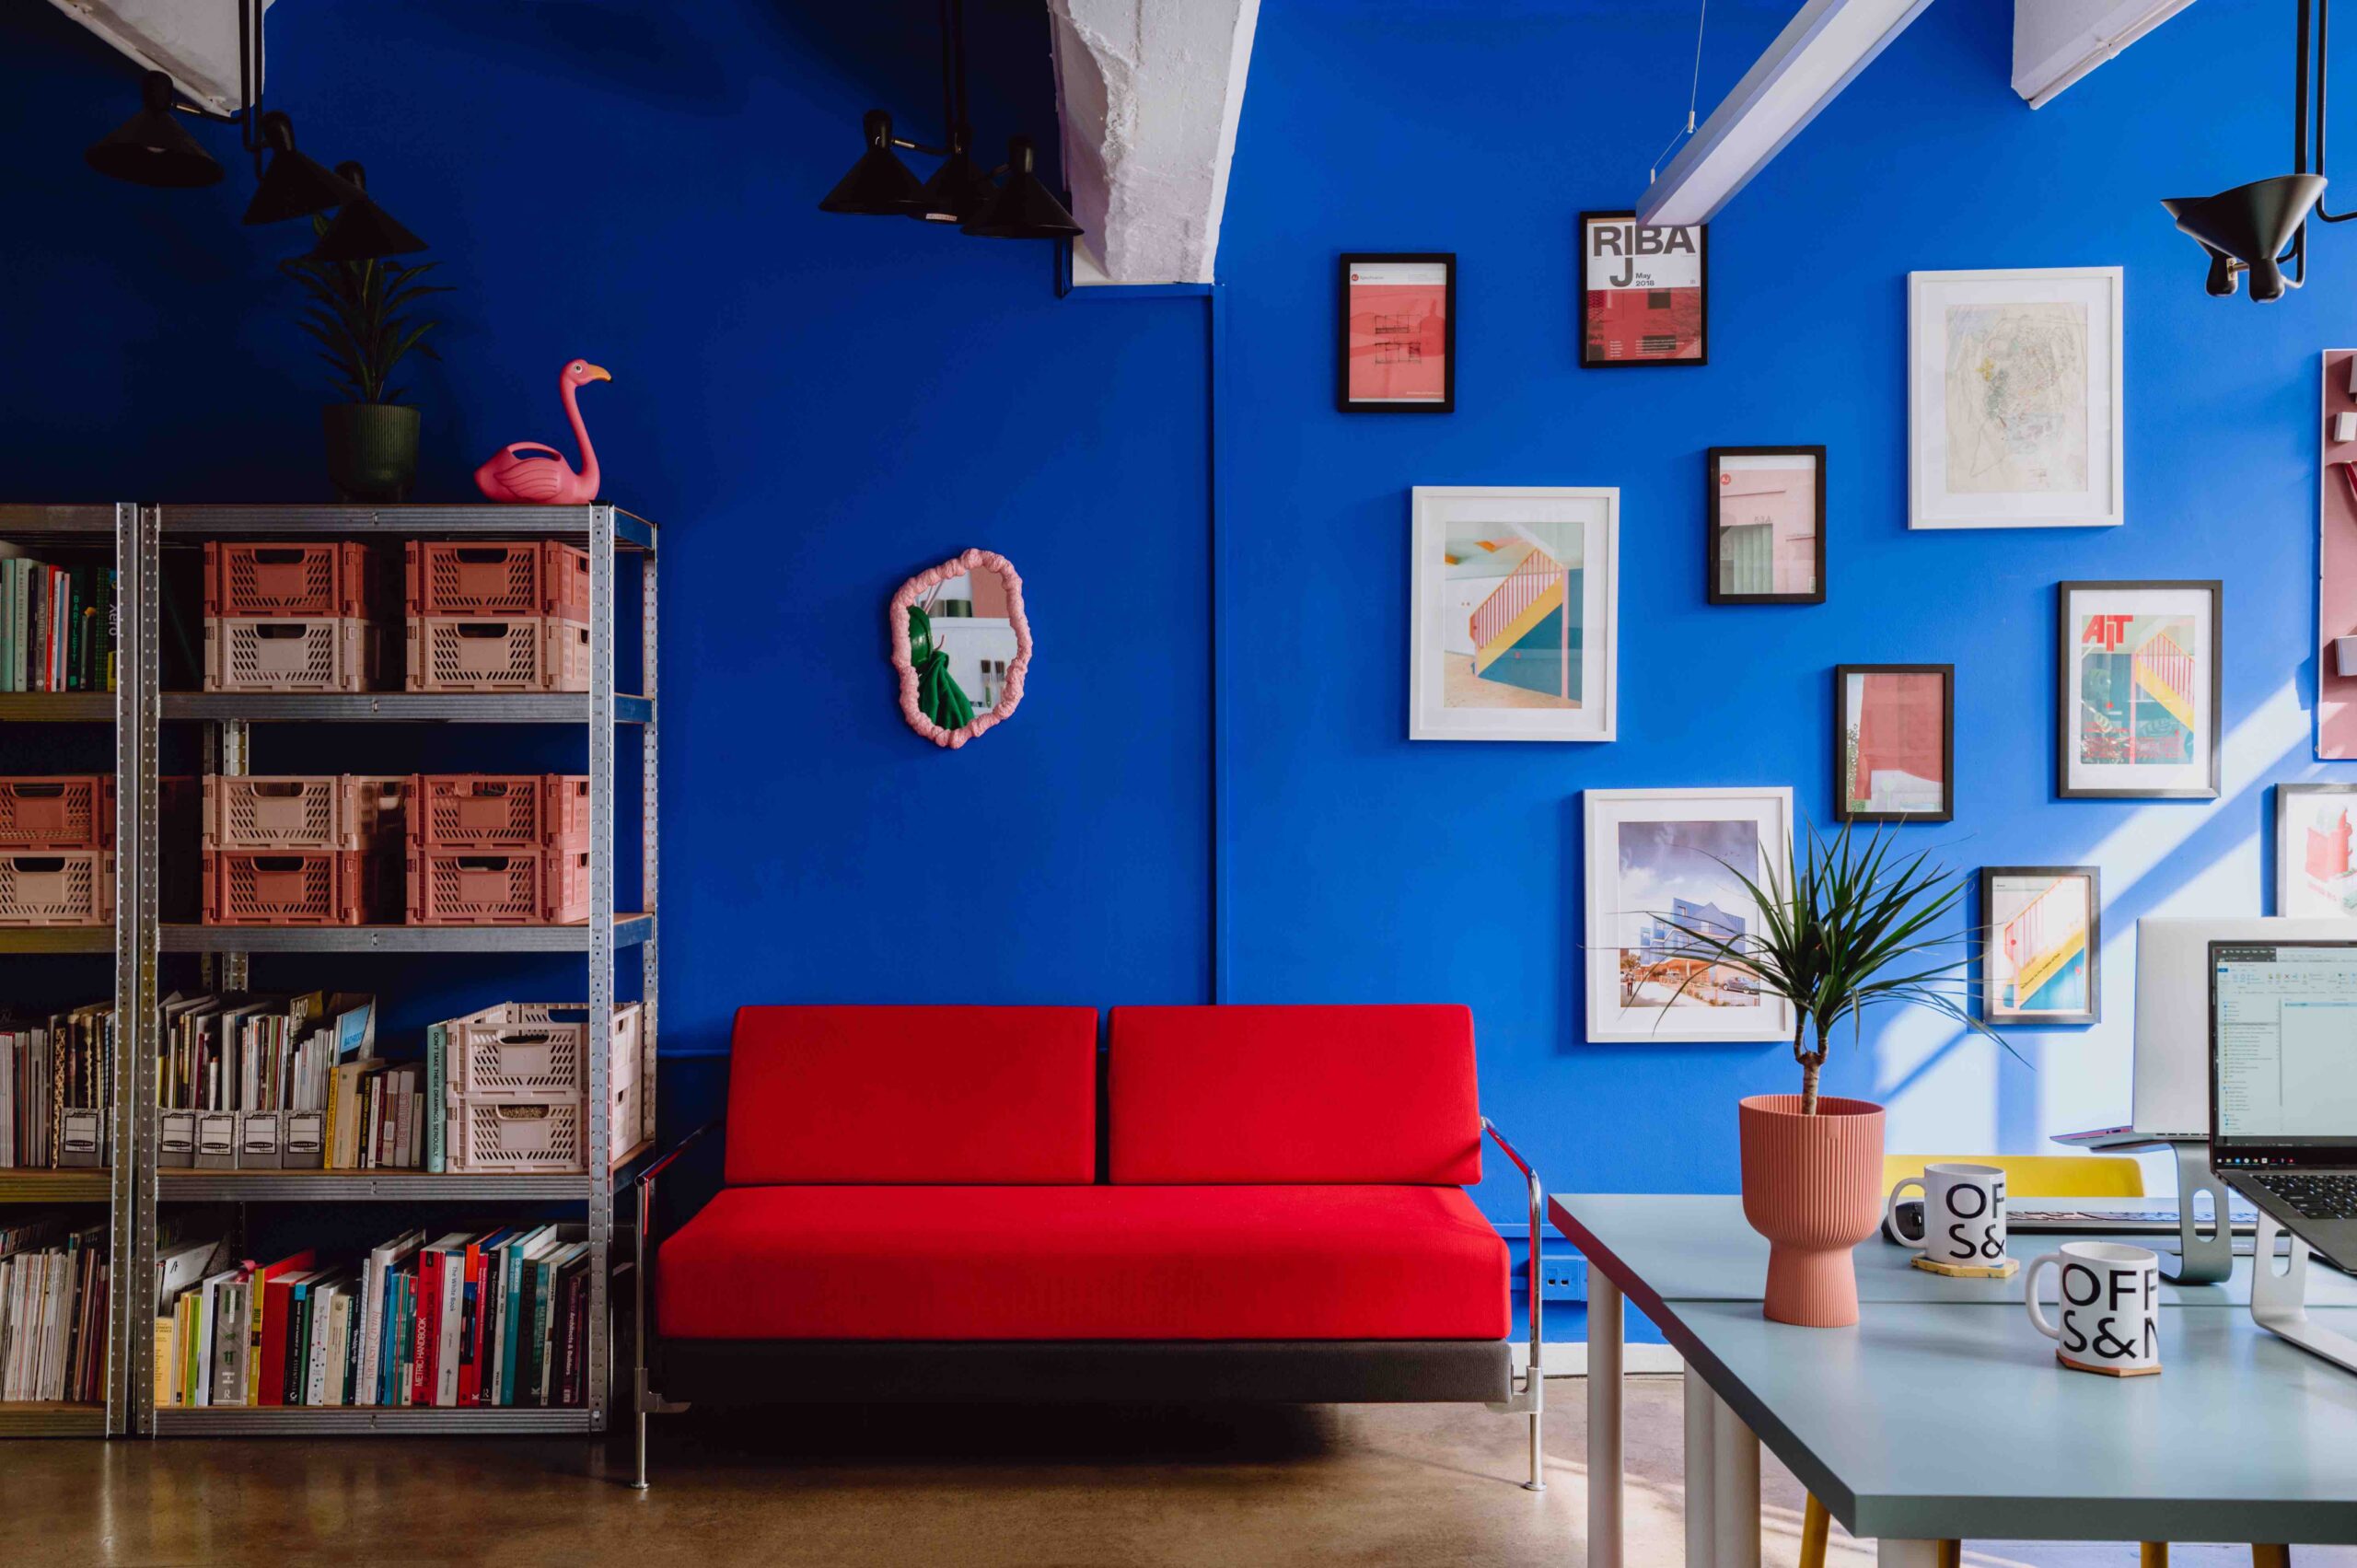 Red sofa against blue wall